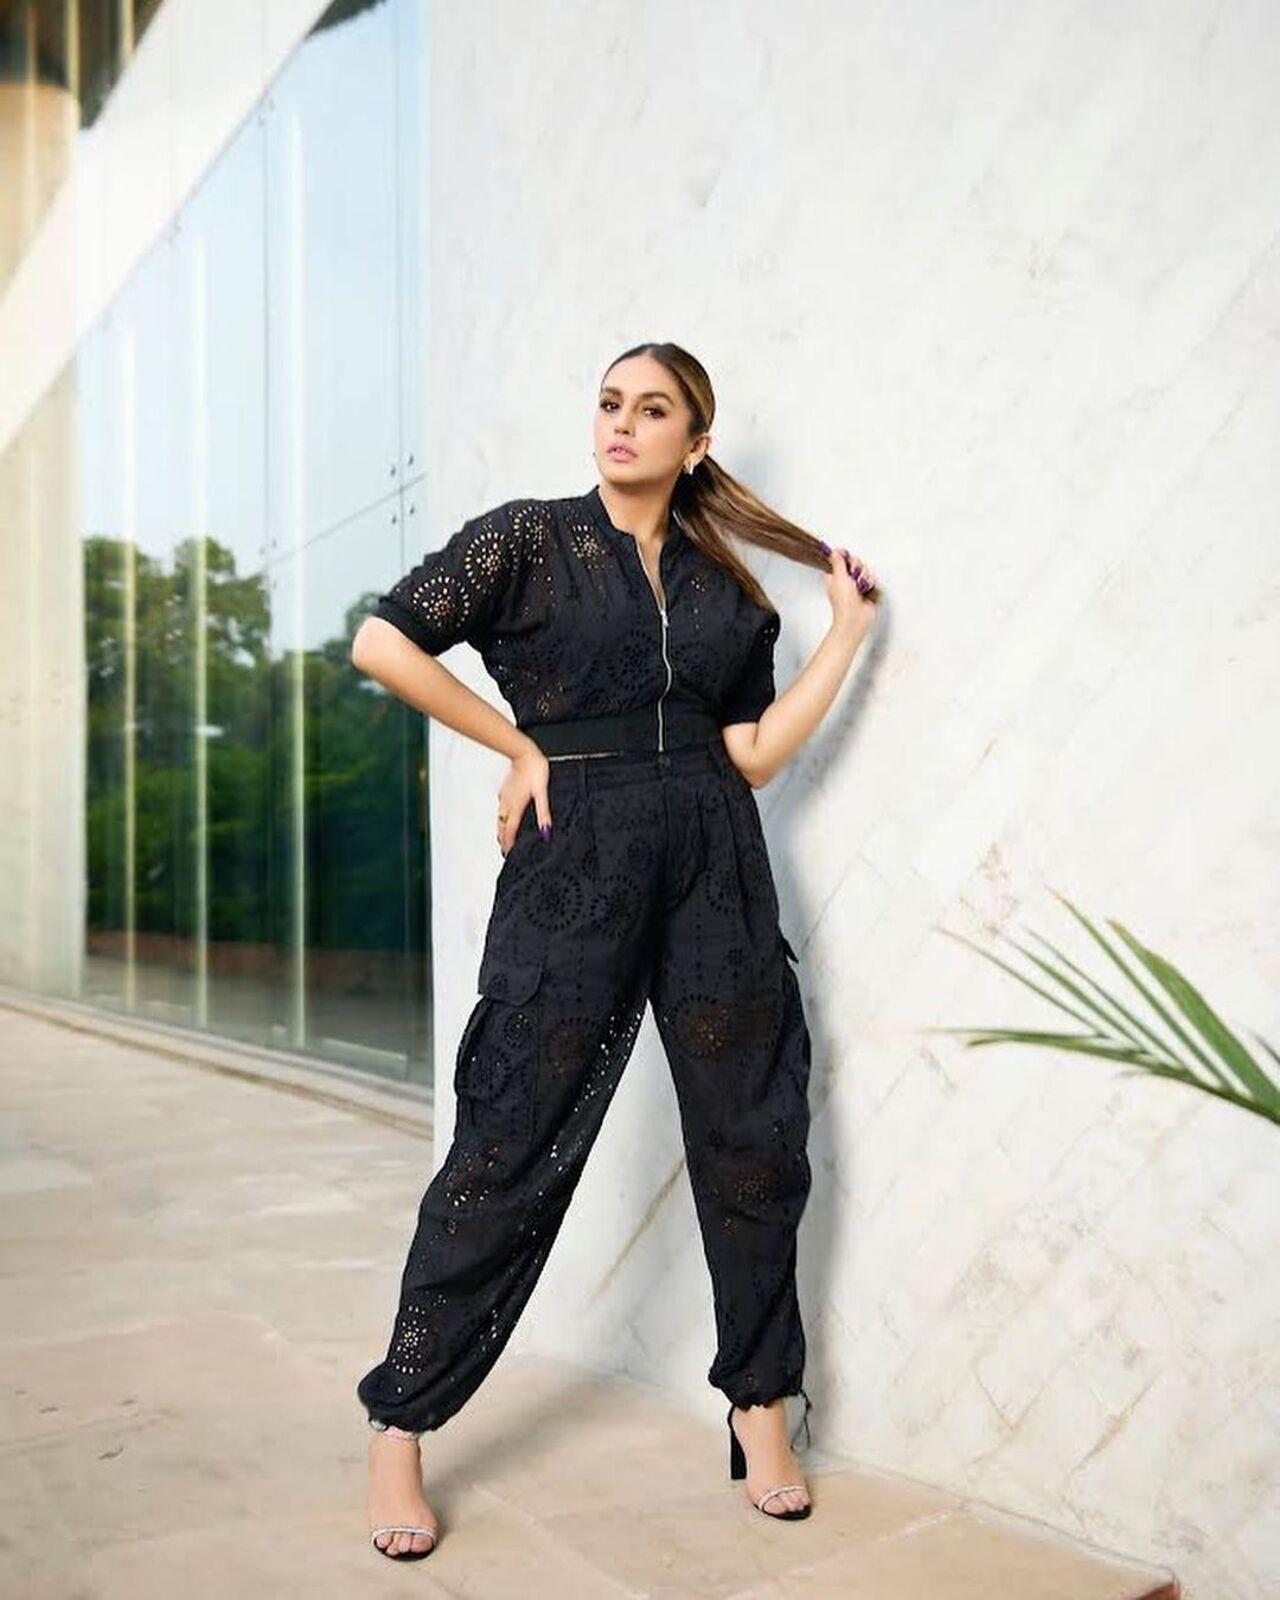 Huma Qureshi radiated elegance and sophistication in a photoshoot as she donned a captivating black co-ord set, complemented by matching heels that accentuated her style